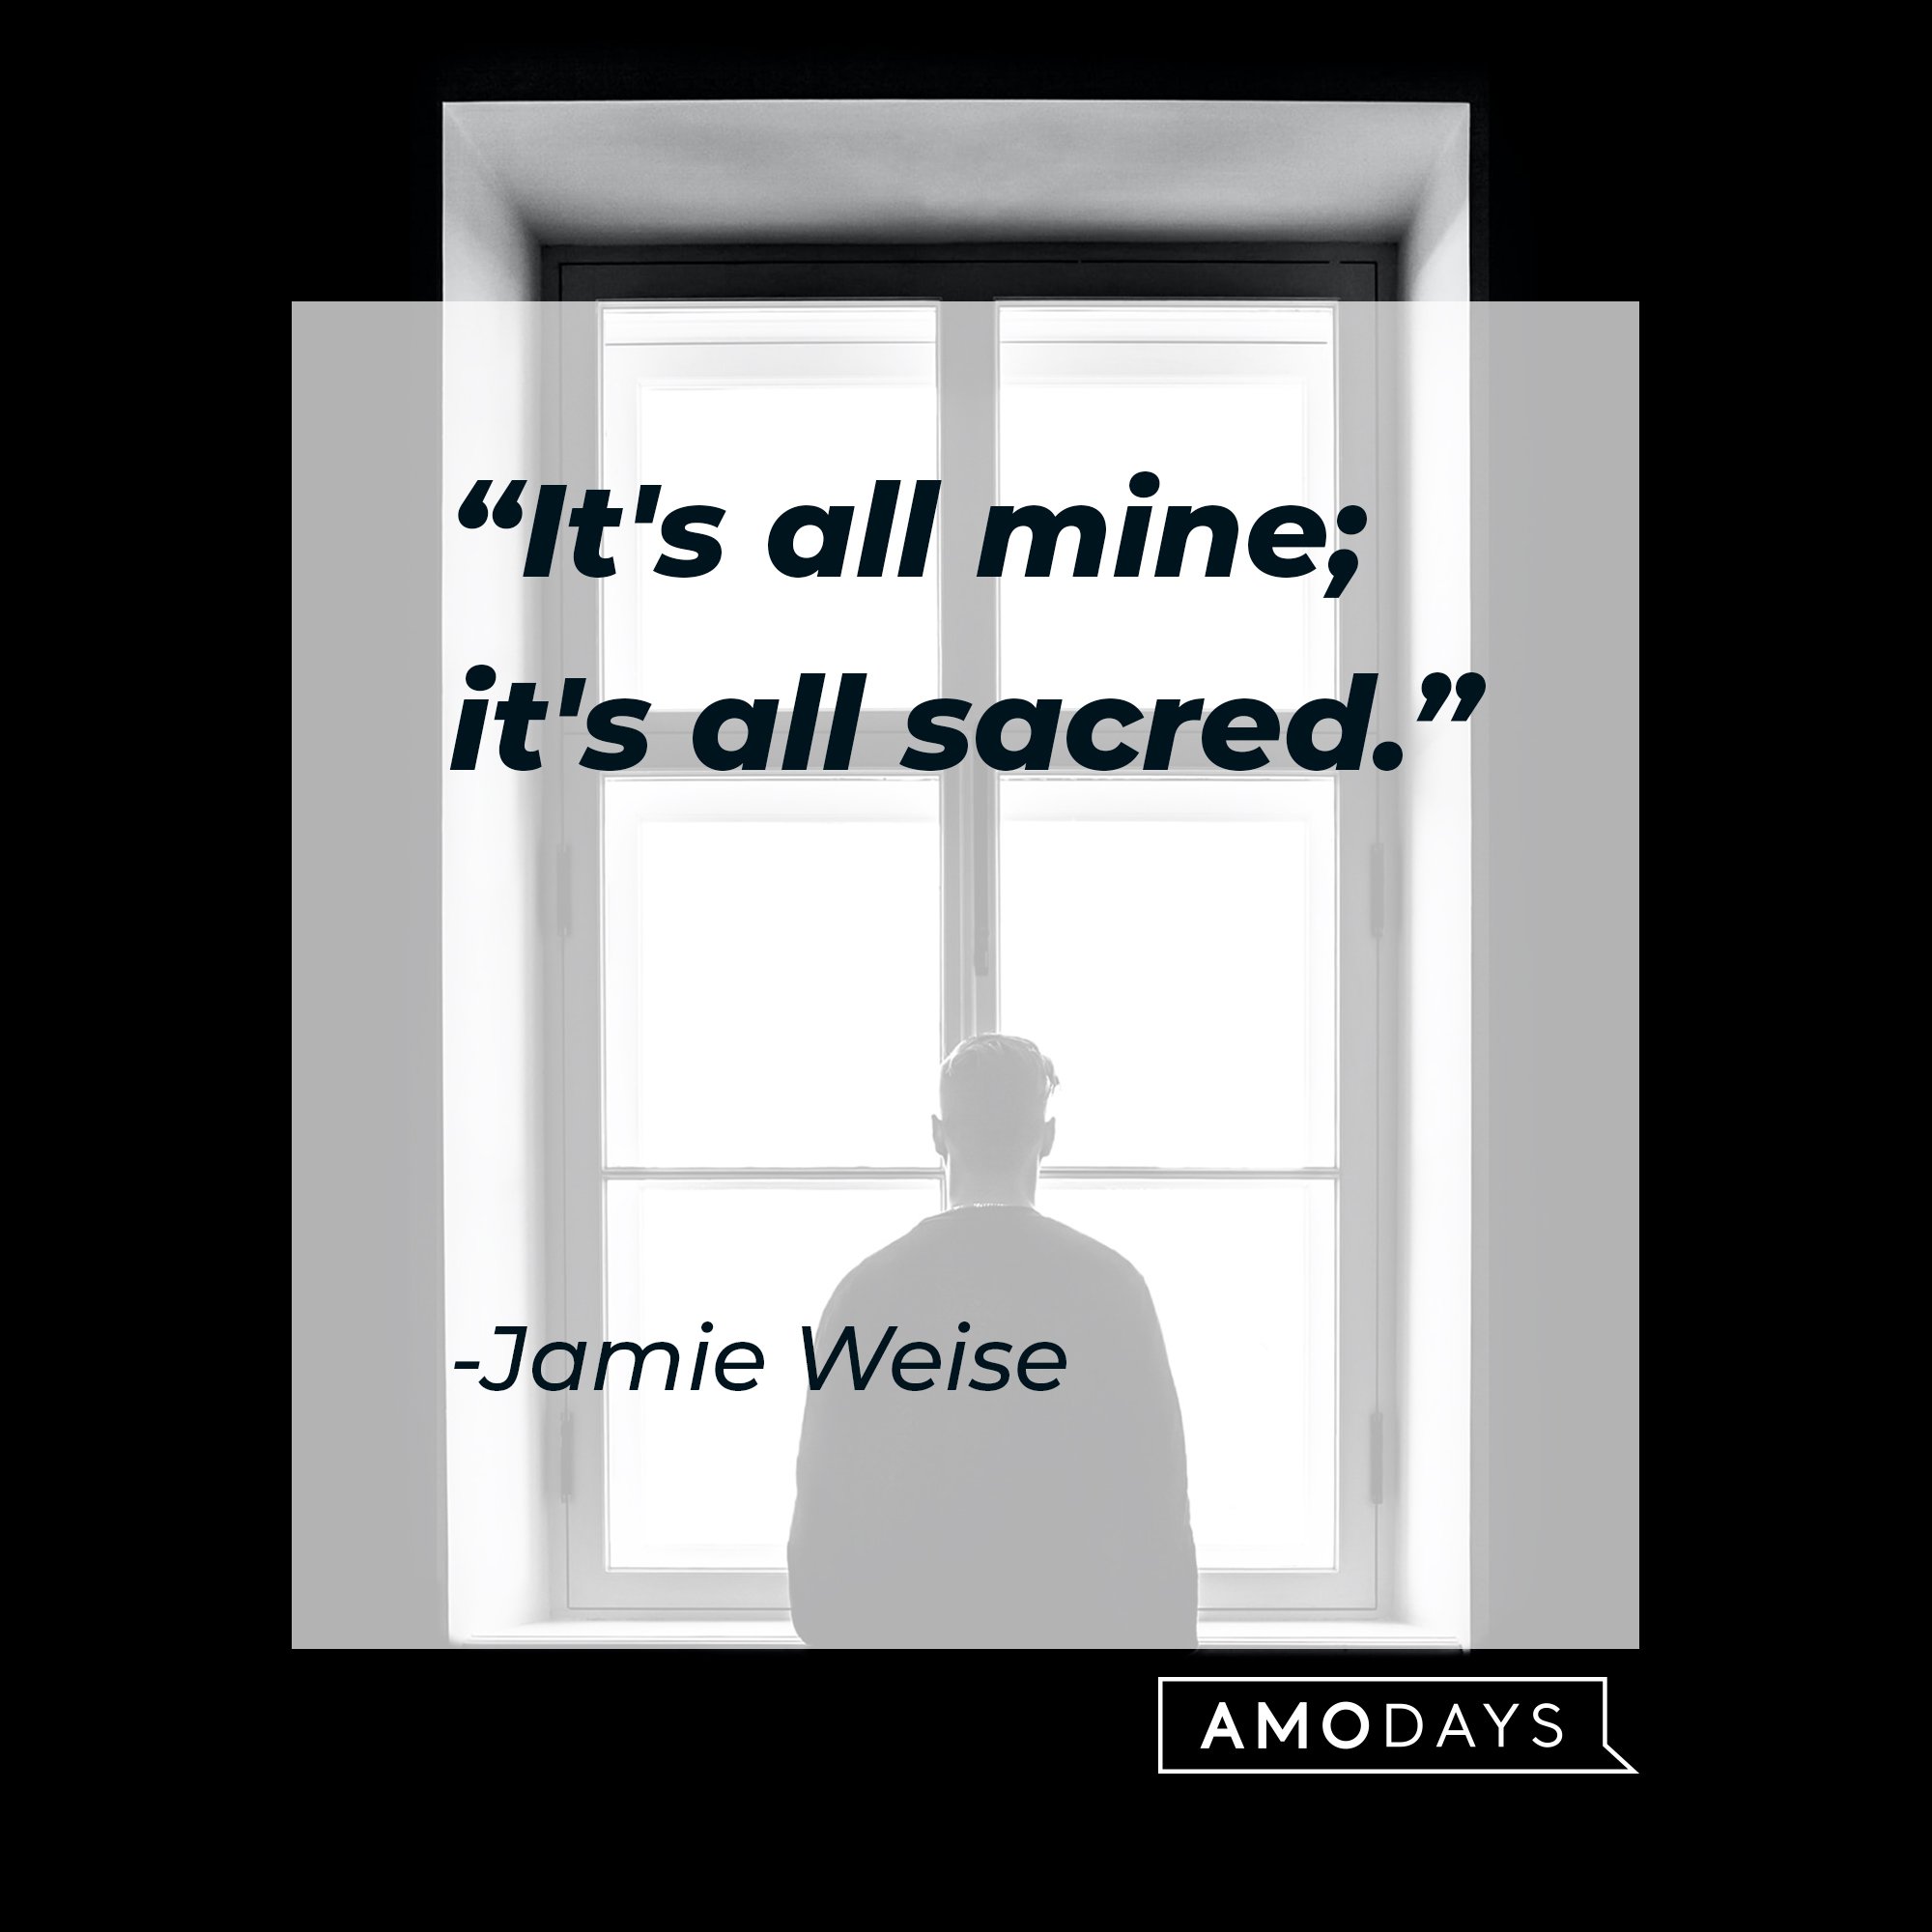 Jamie Weise’s quote: "It's all mine; it's all sacred." | Image: AmoDays 